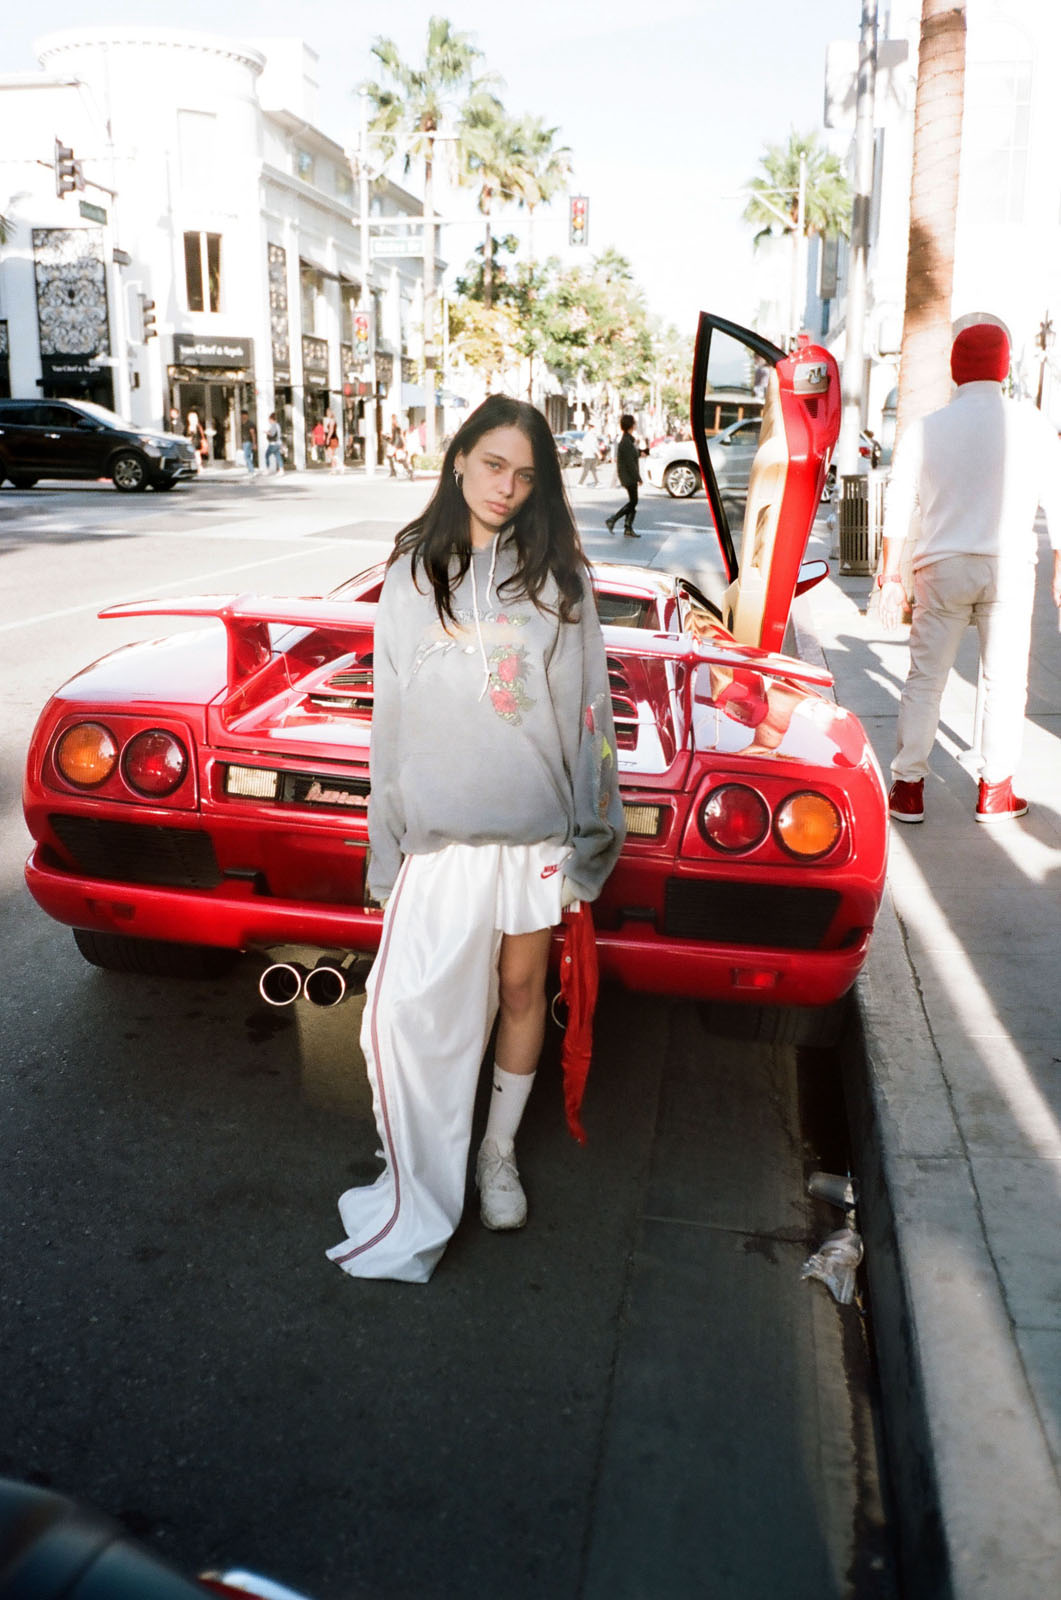 001 - PERFORMANCE IN BEVERLY HILLS